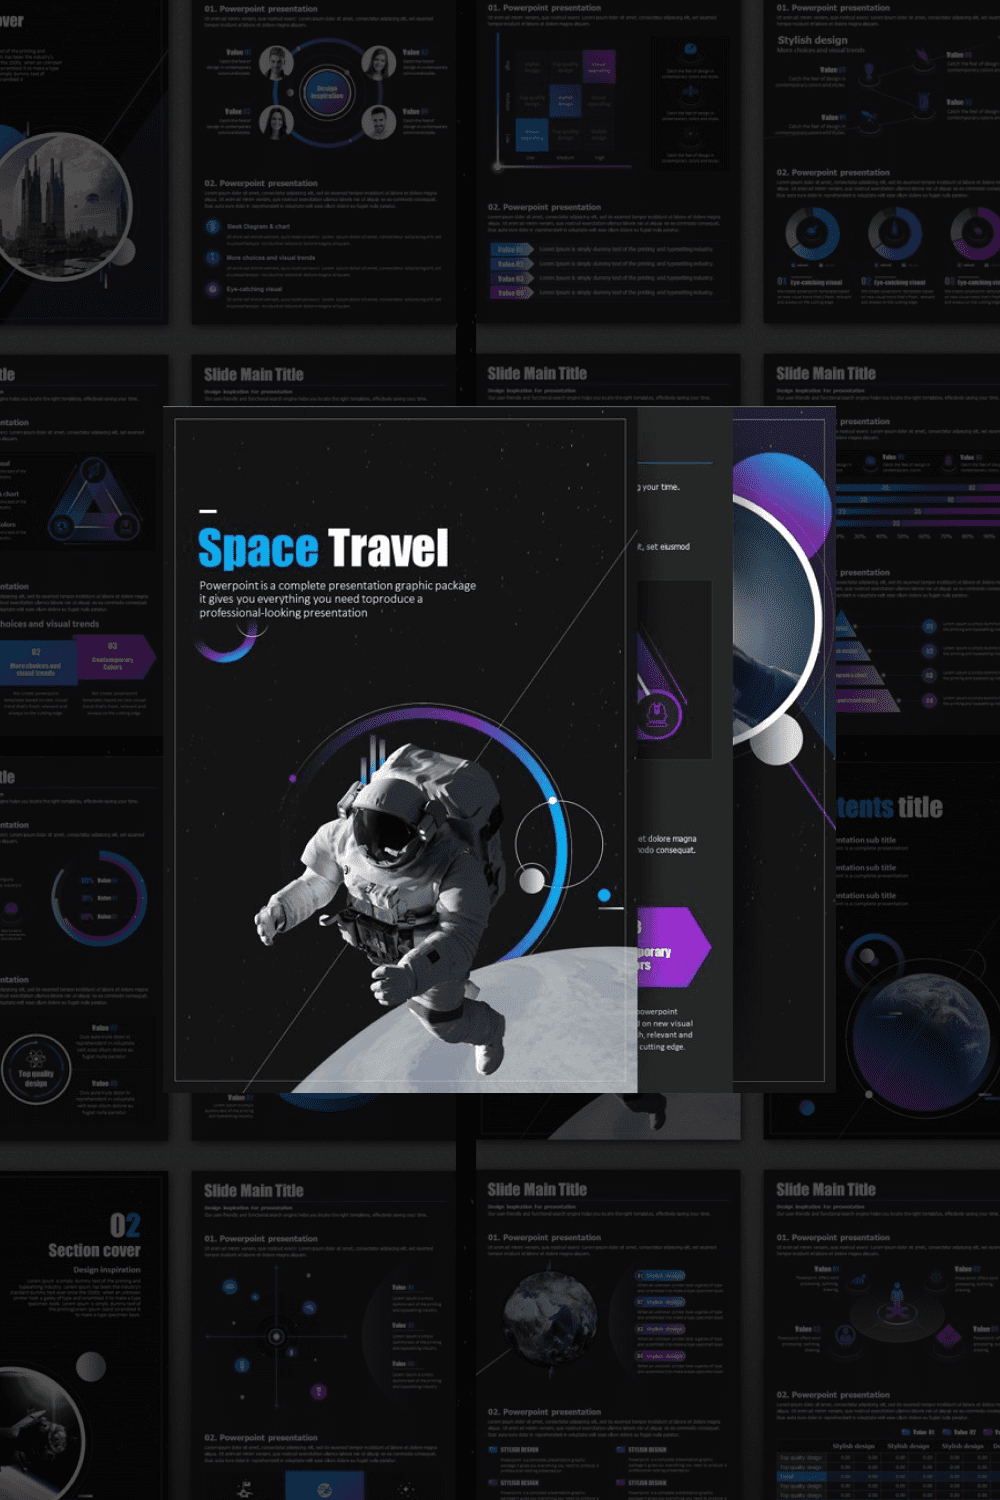 space travel vertical powerpoint pinterest image.